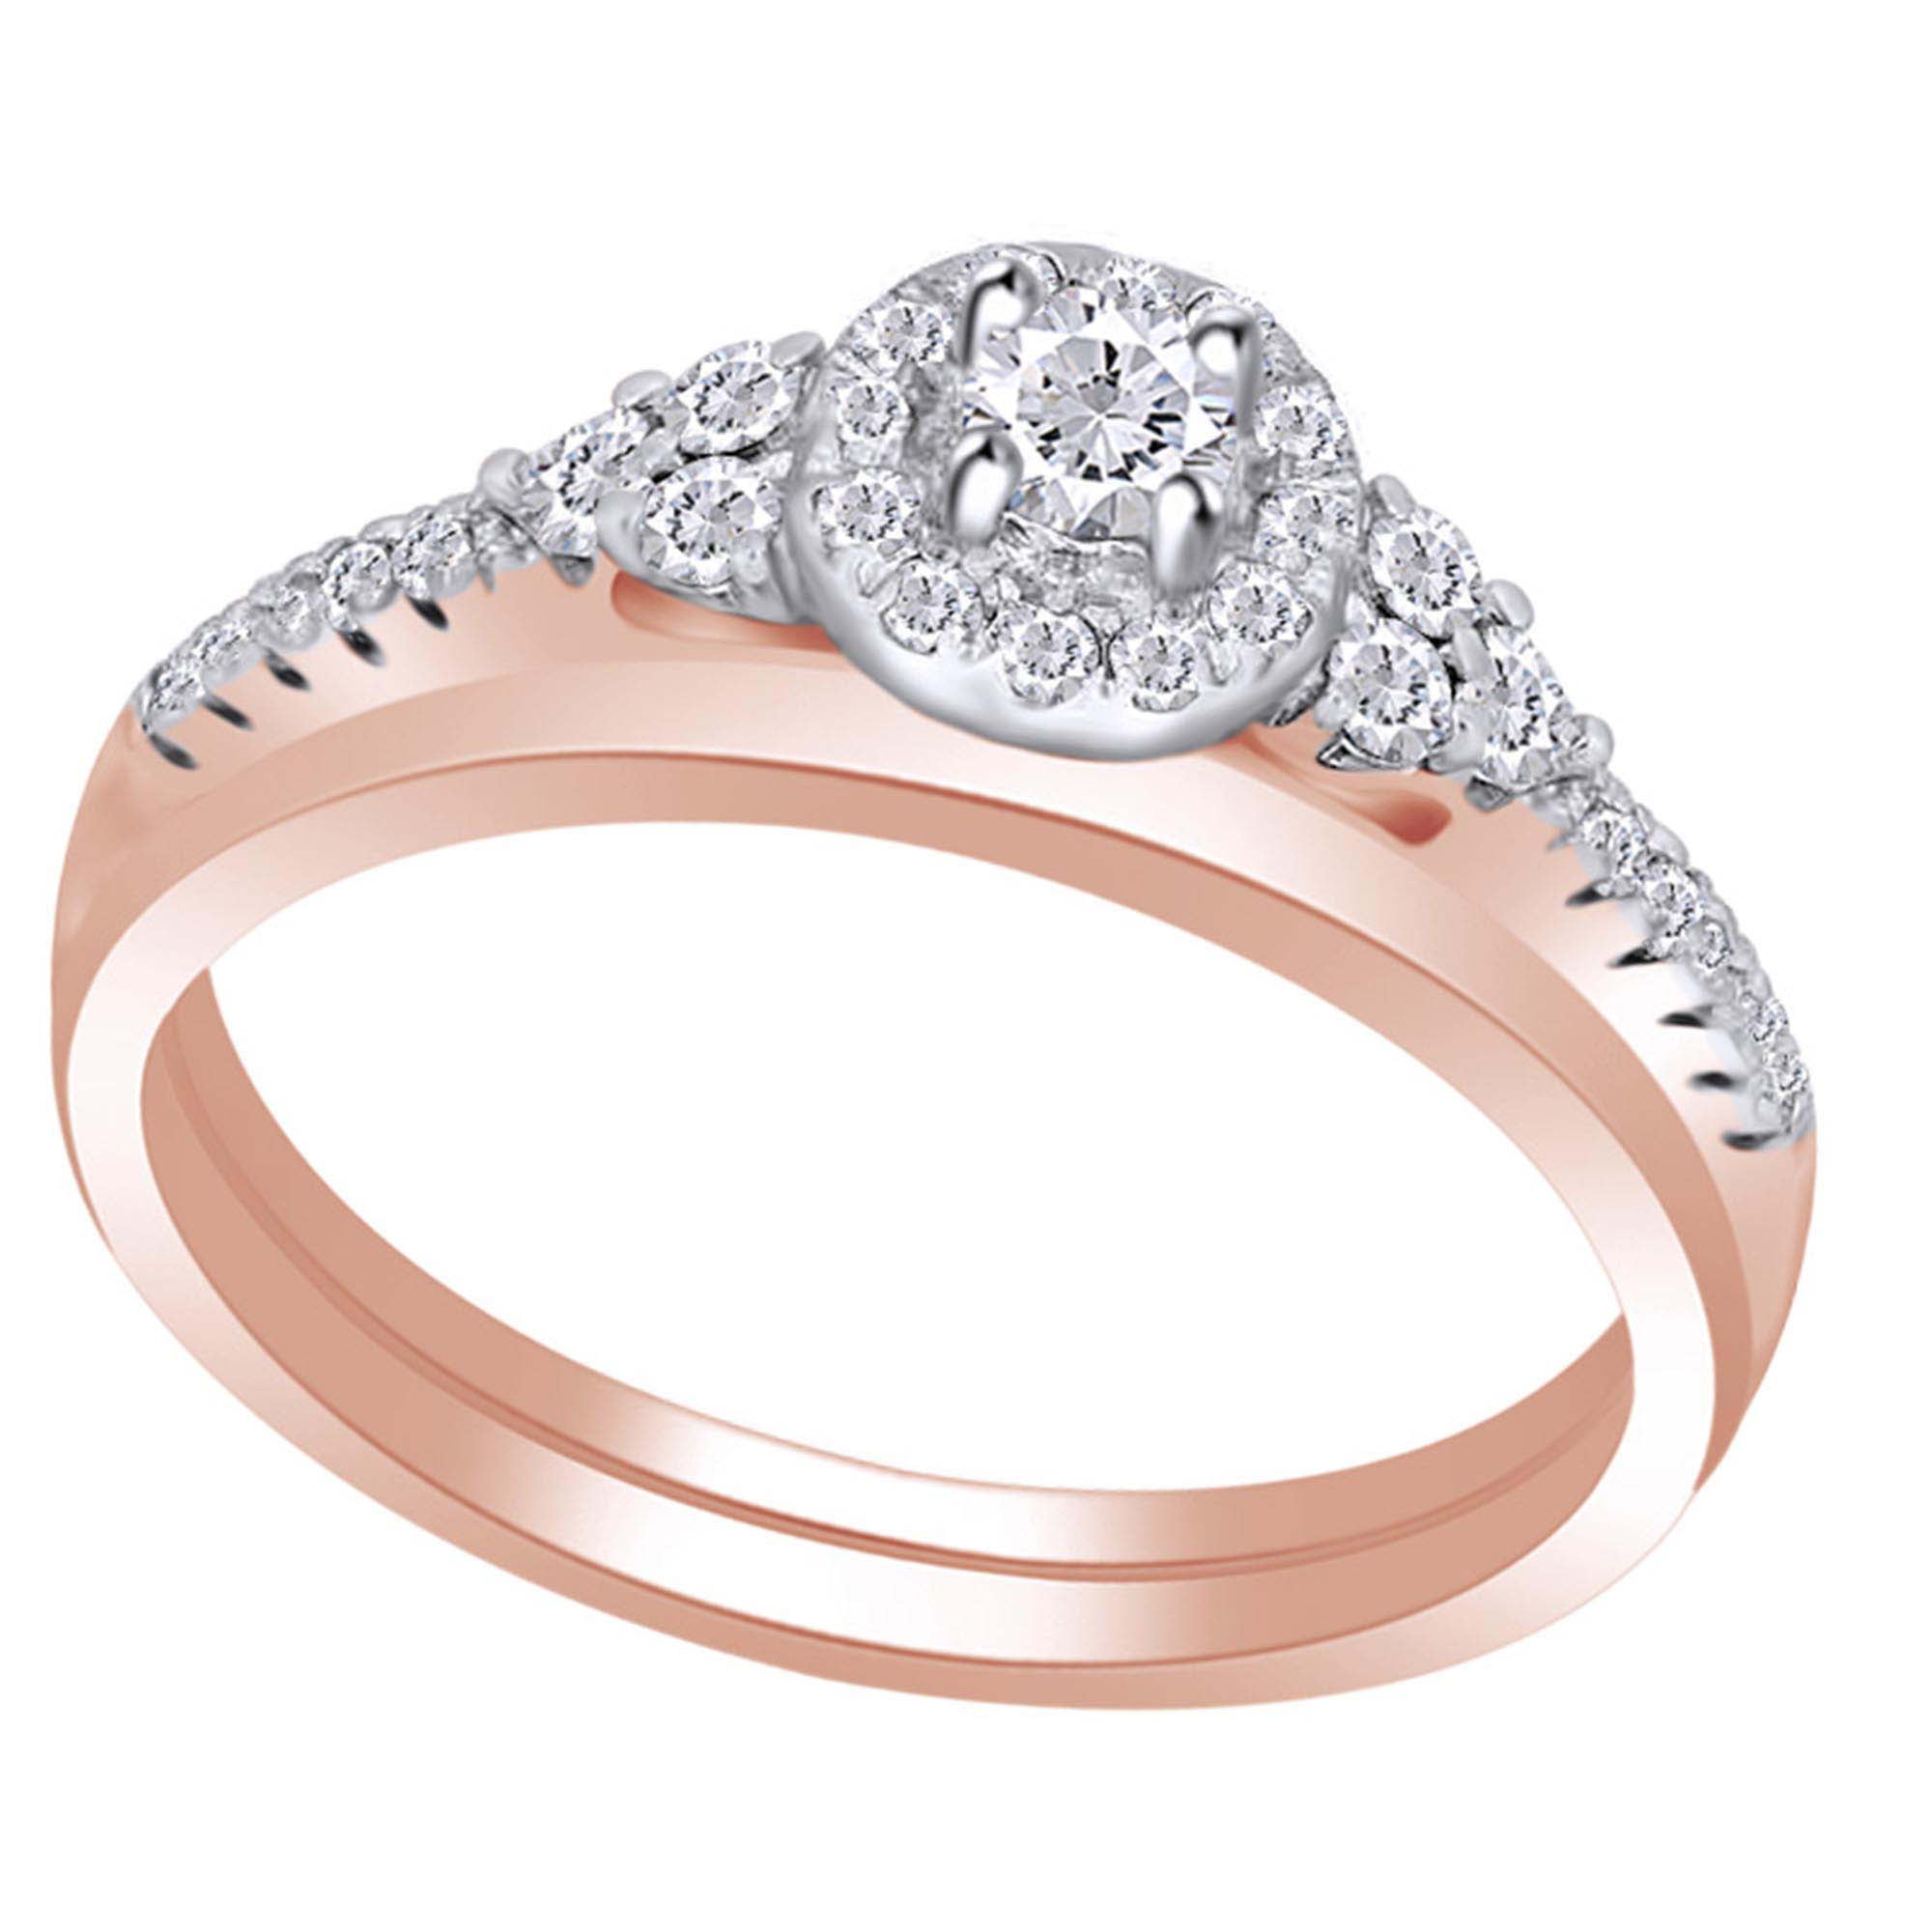 Diamond Wedding Band in 10K Pink Gold 1/10 cttw, G-H,I2-I3 Size-5 